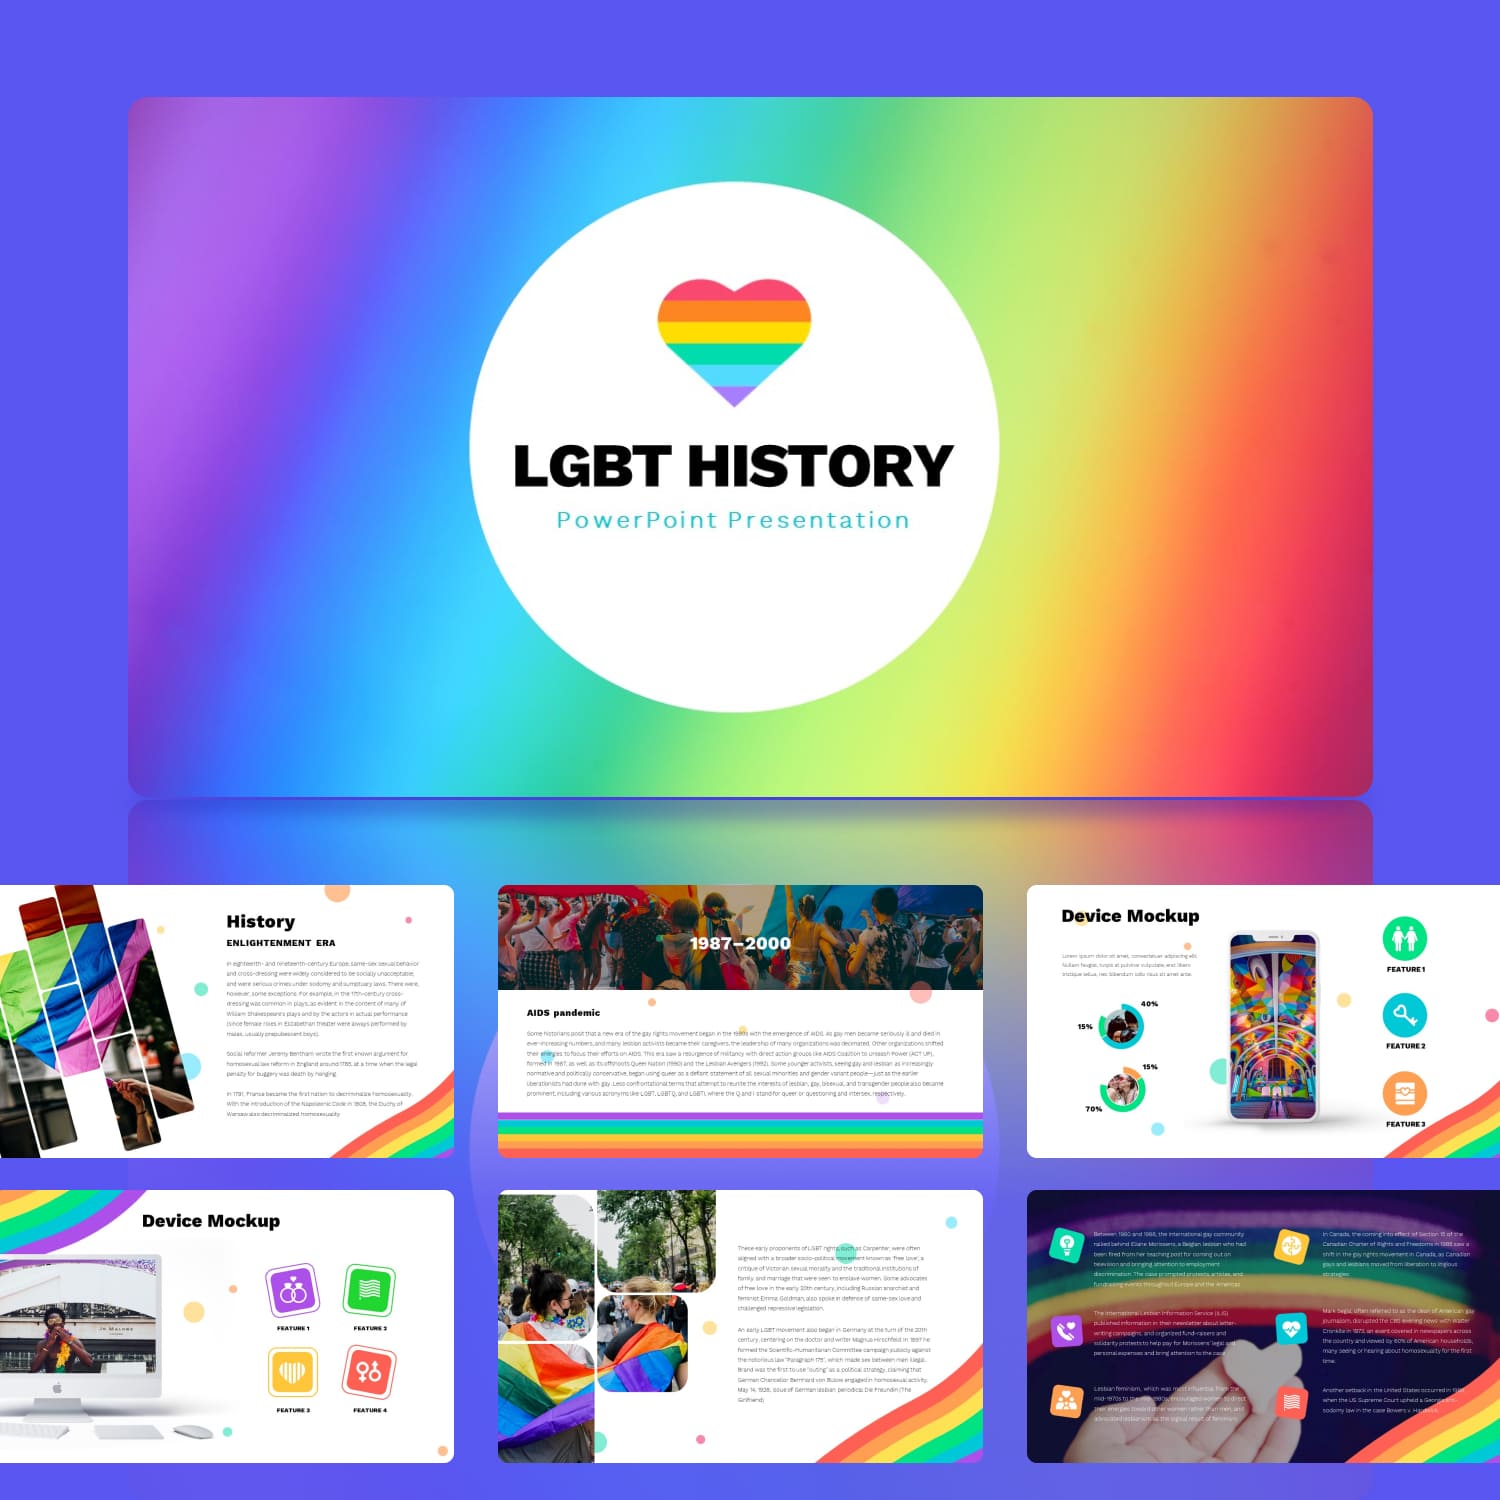 LGBT history powerpoint Template.